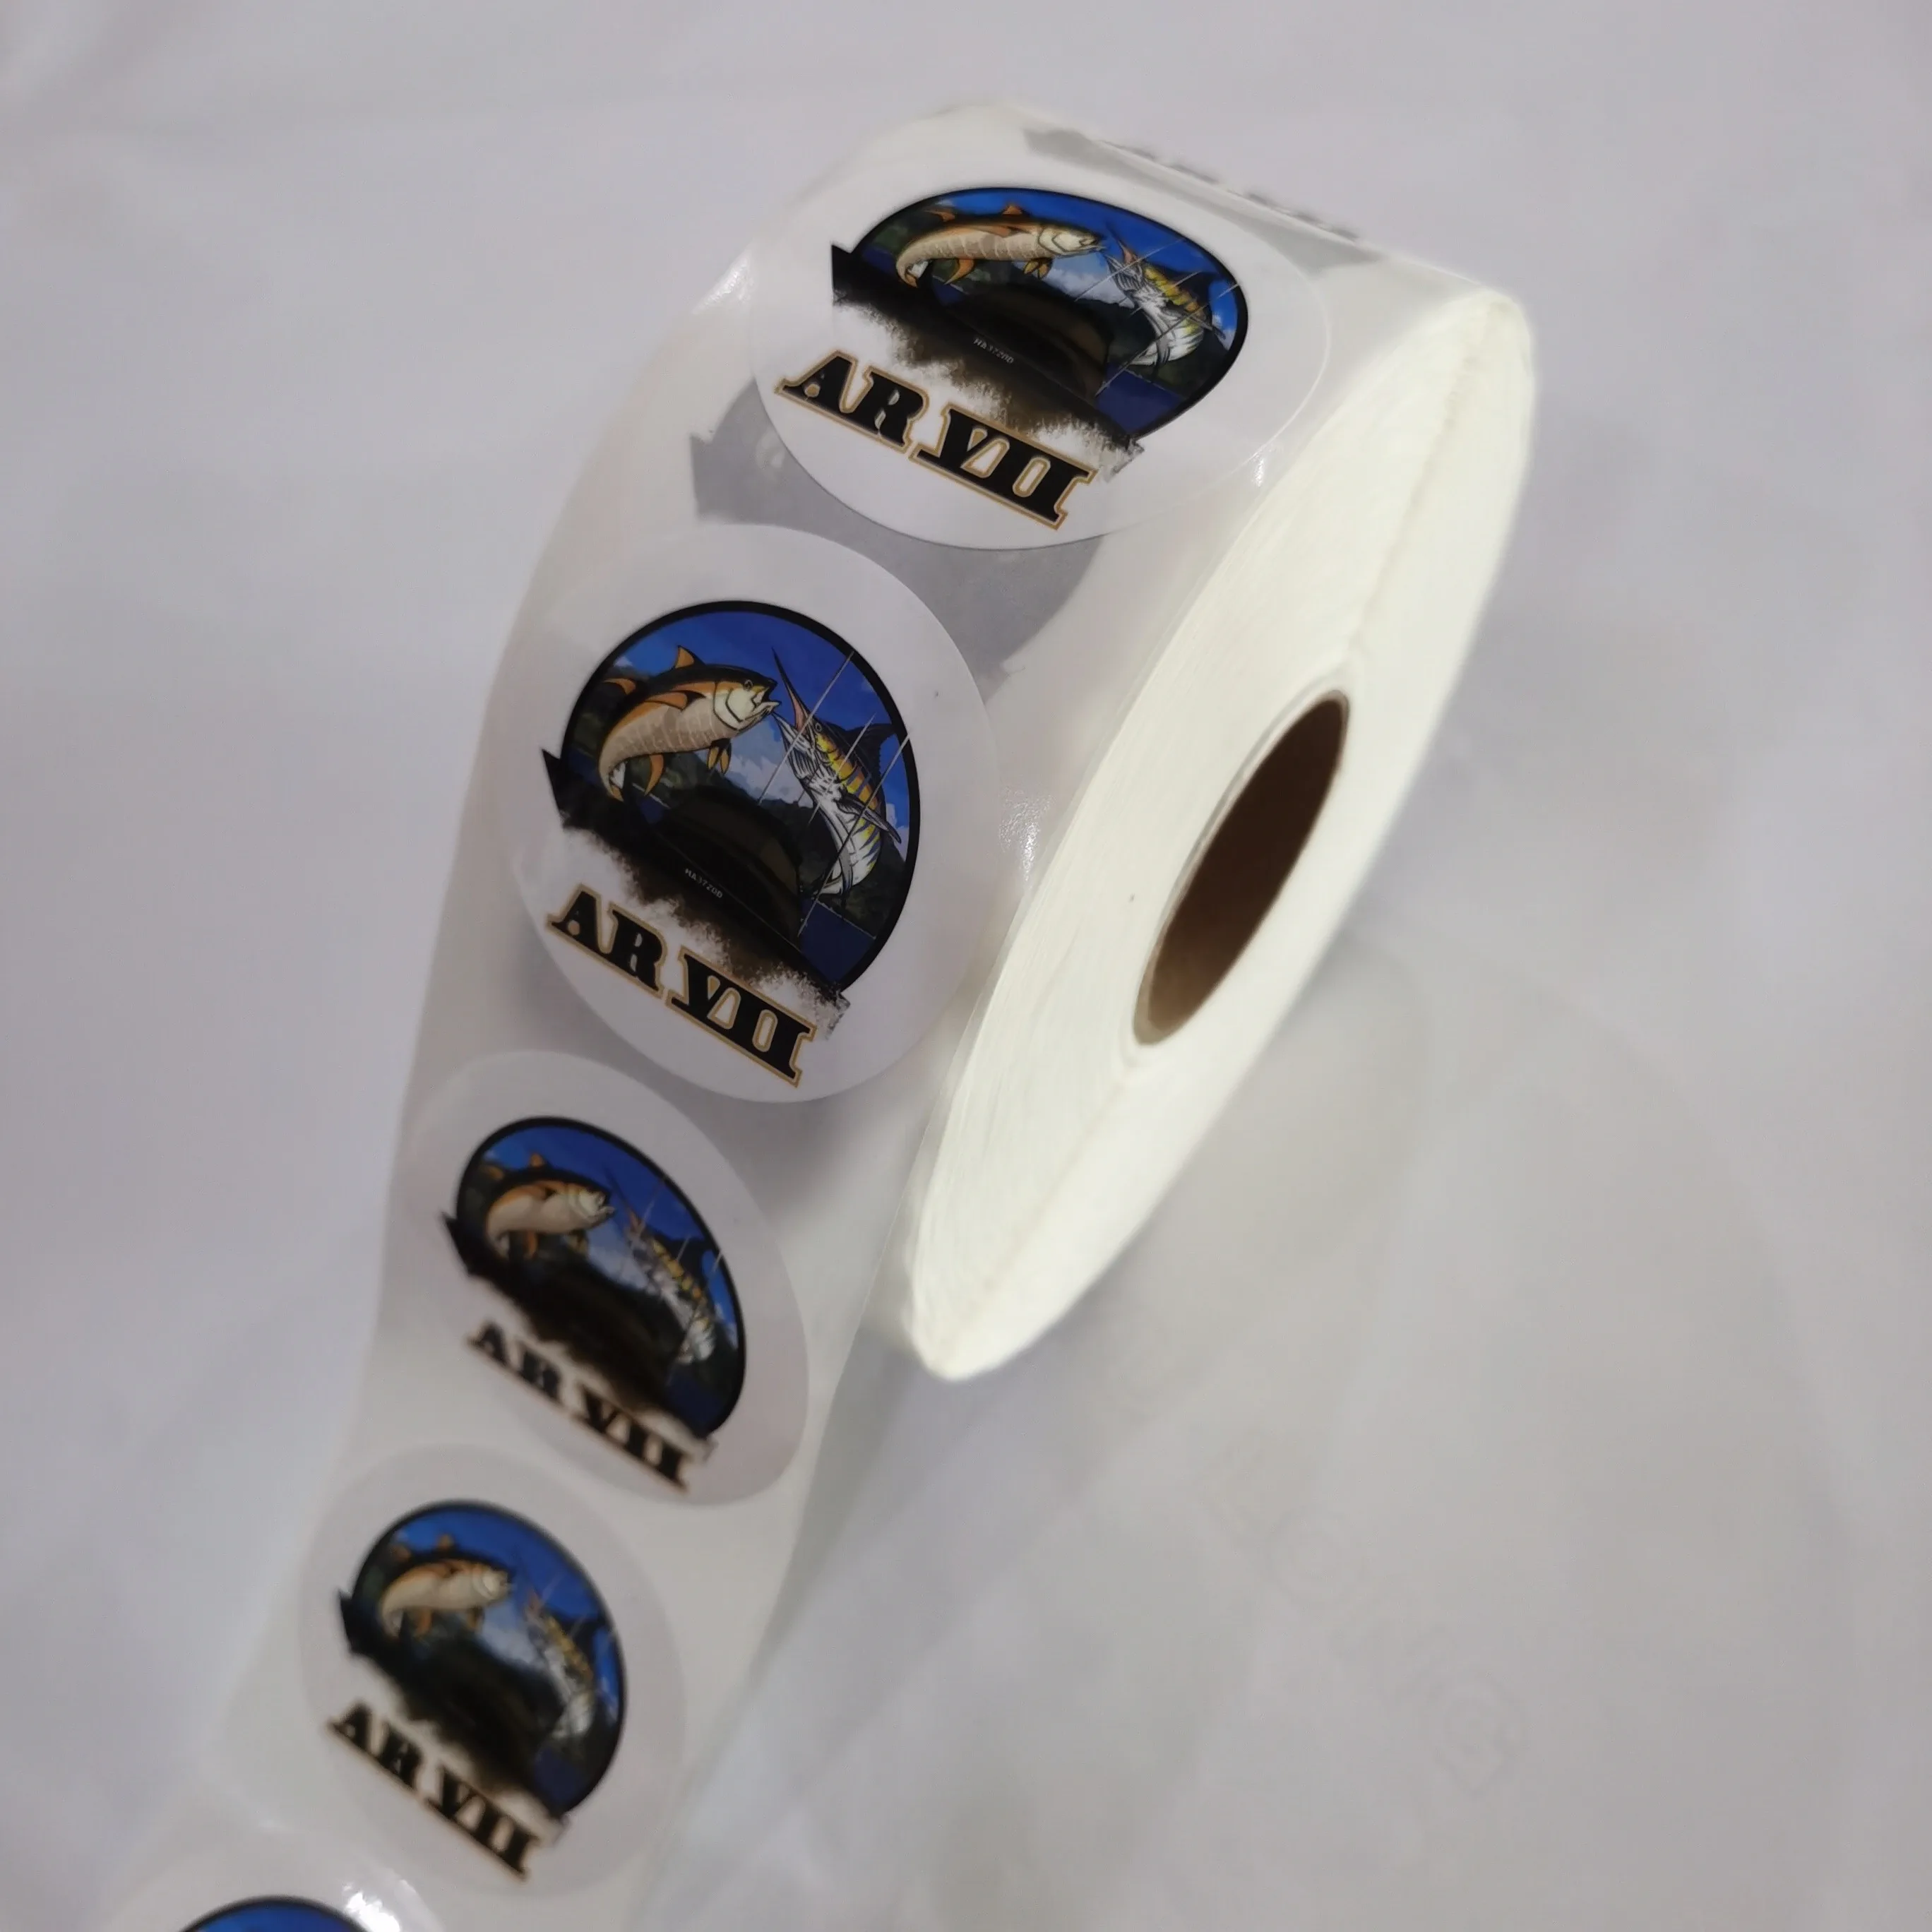 Roll Stickers